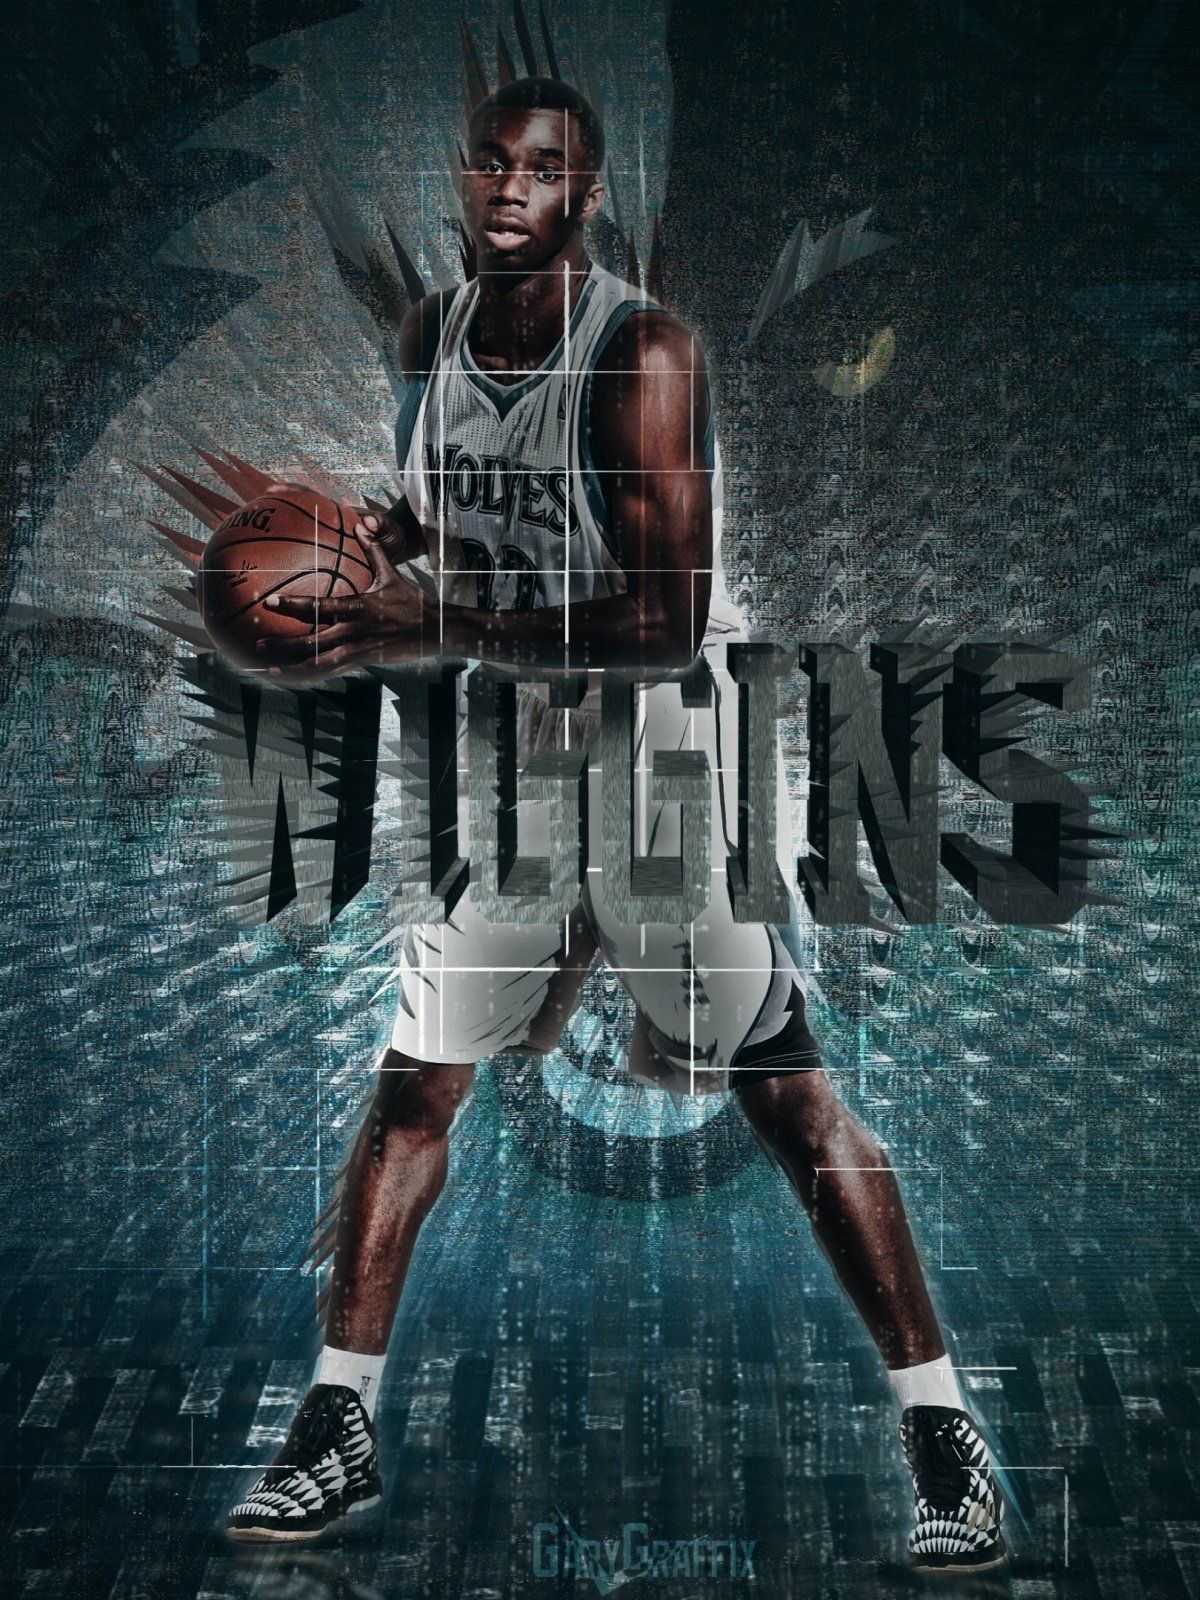 16362 Andrew Wiggins Photos Stock Photos HighRes Pictures and Images   Getty Images